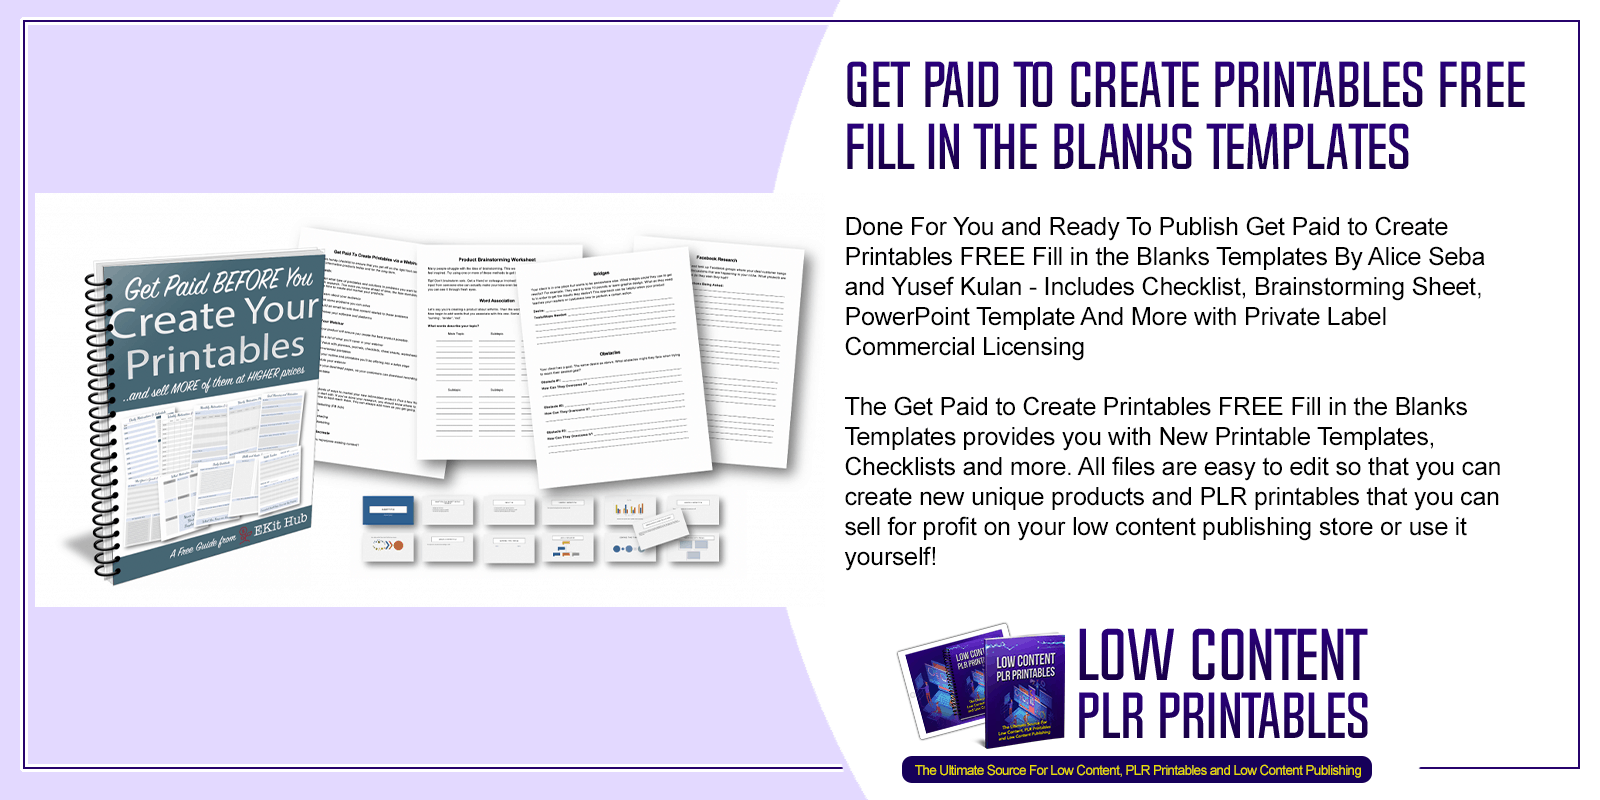 Get Paid to Create Printables FREE Fill in the Blanks Templates